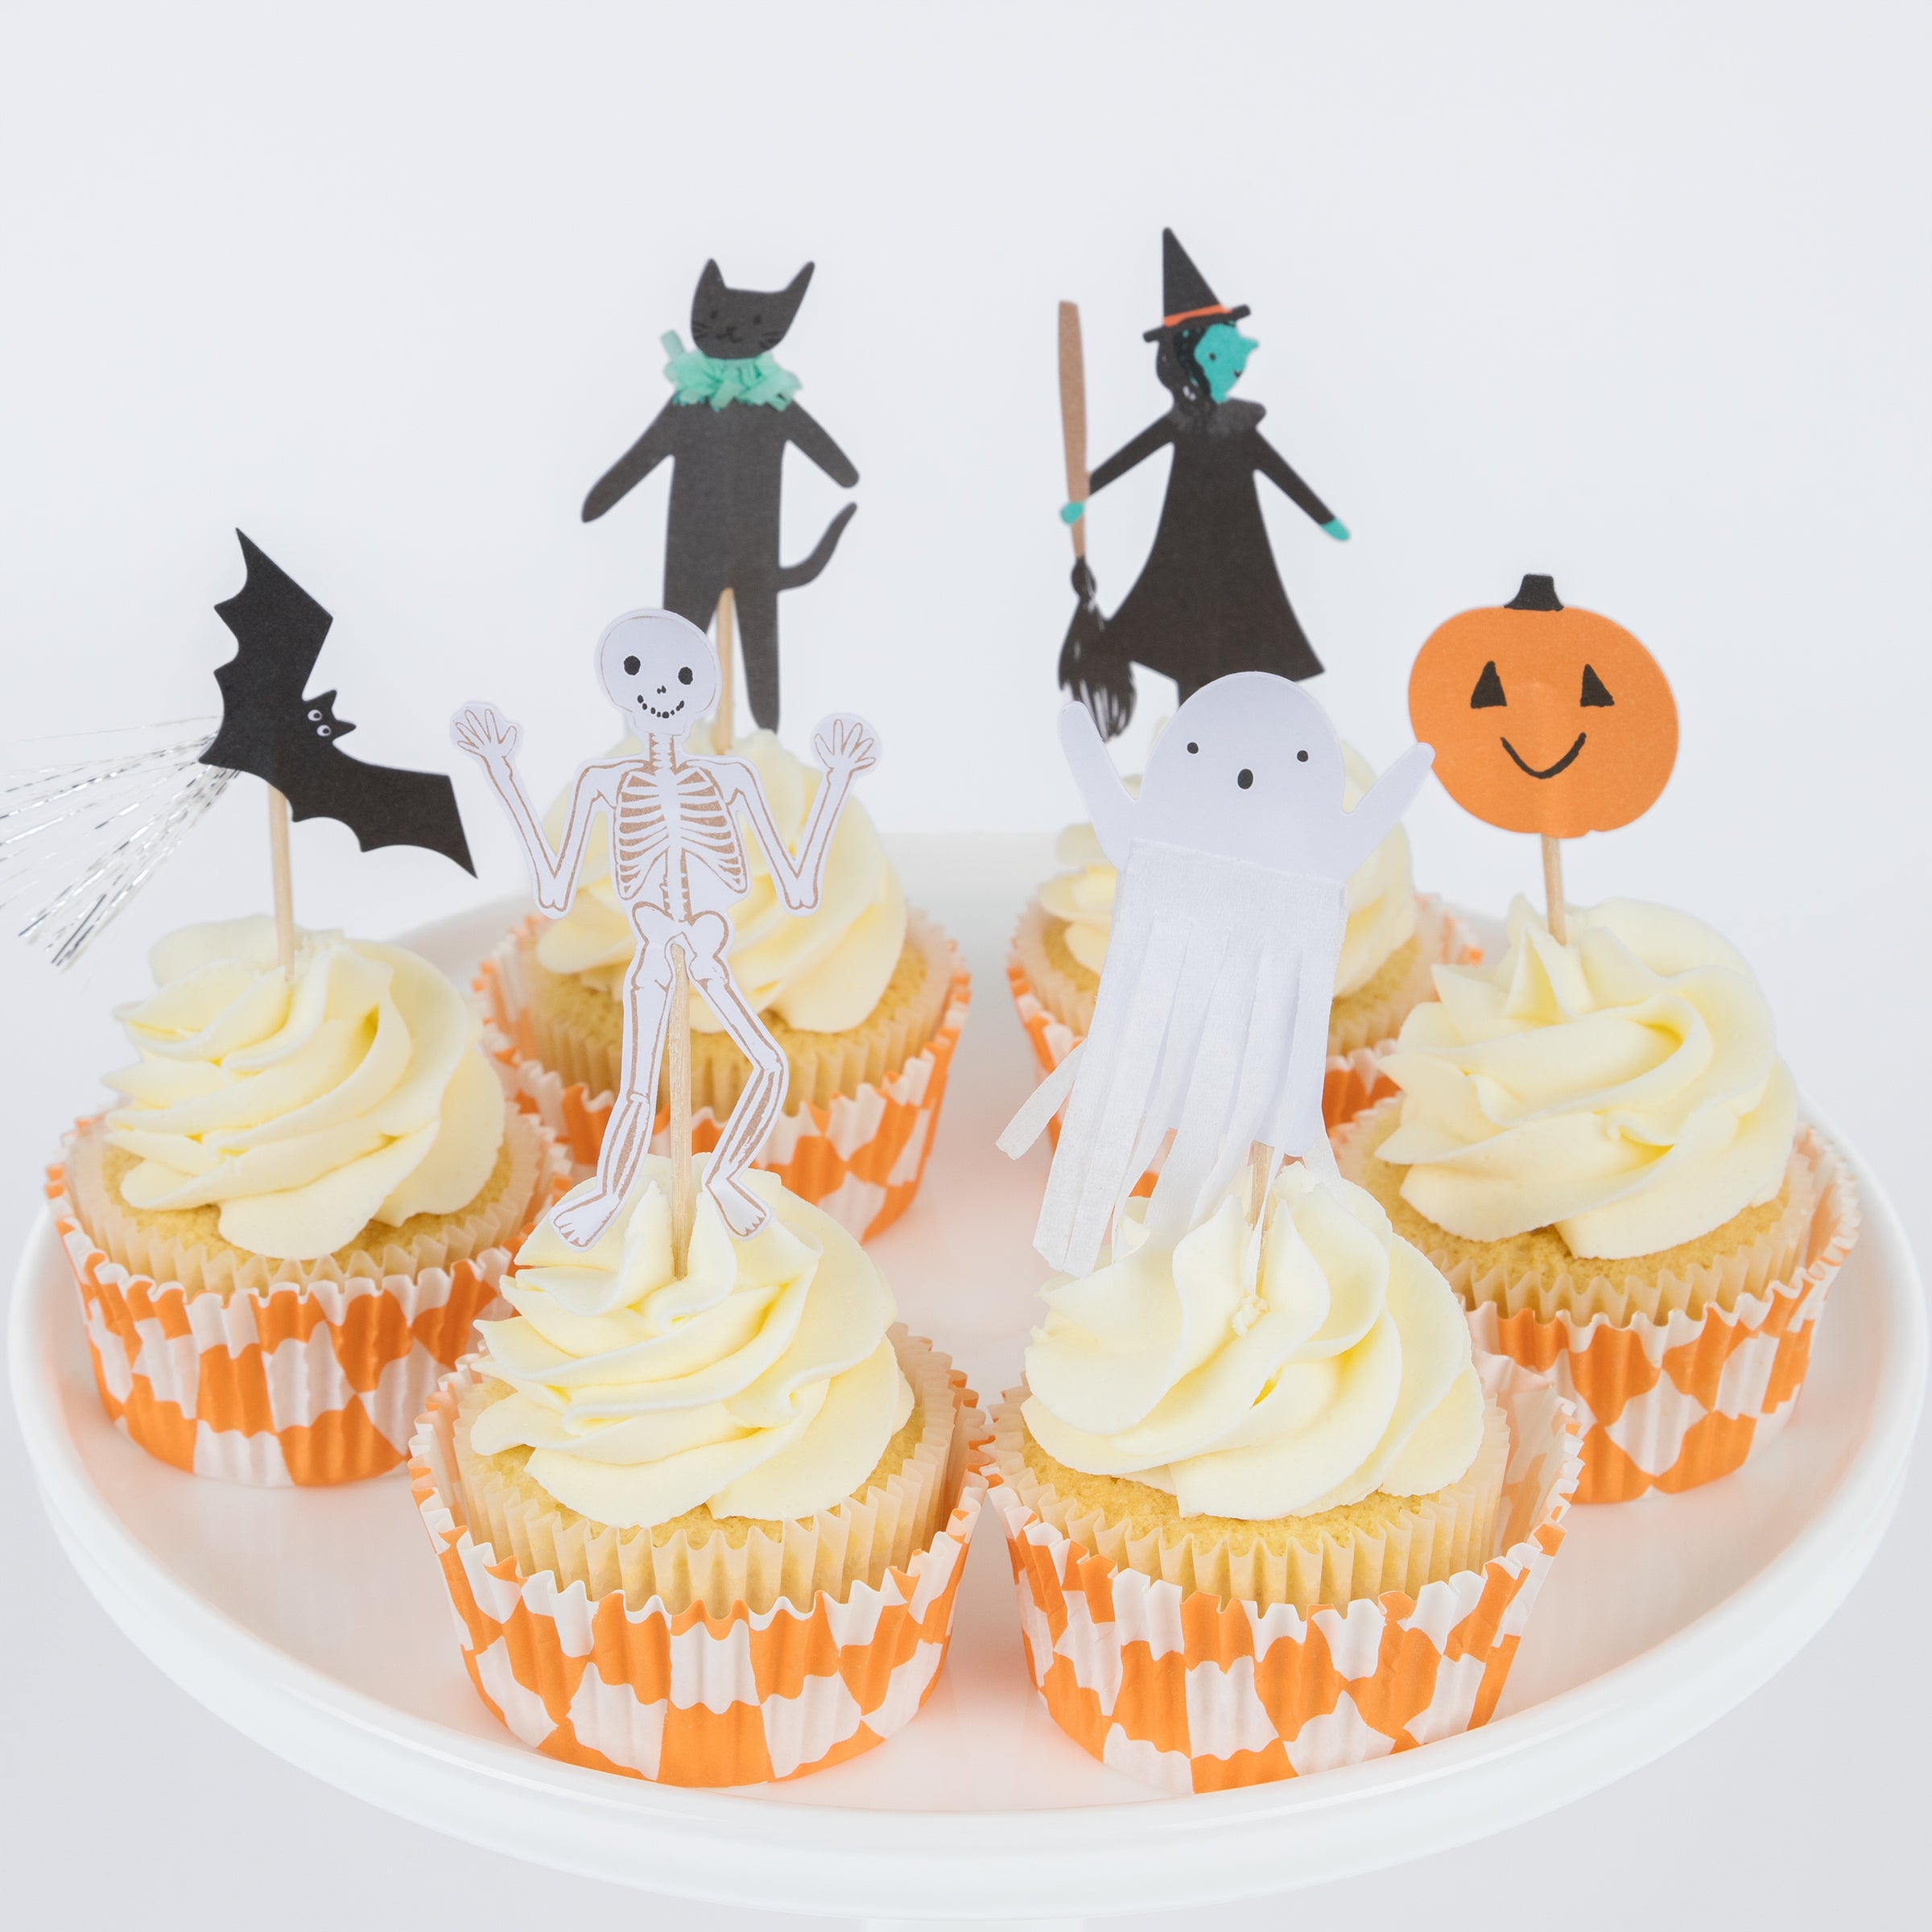 Our Halloween character cake toppers and paper cupcake cases are perfect for Halloween bakes.